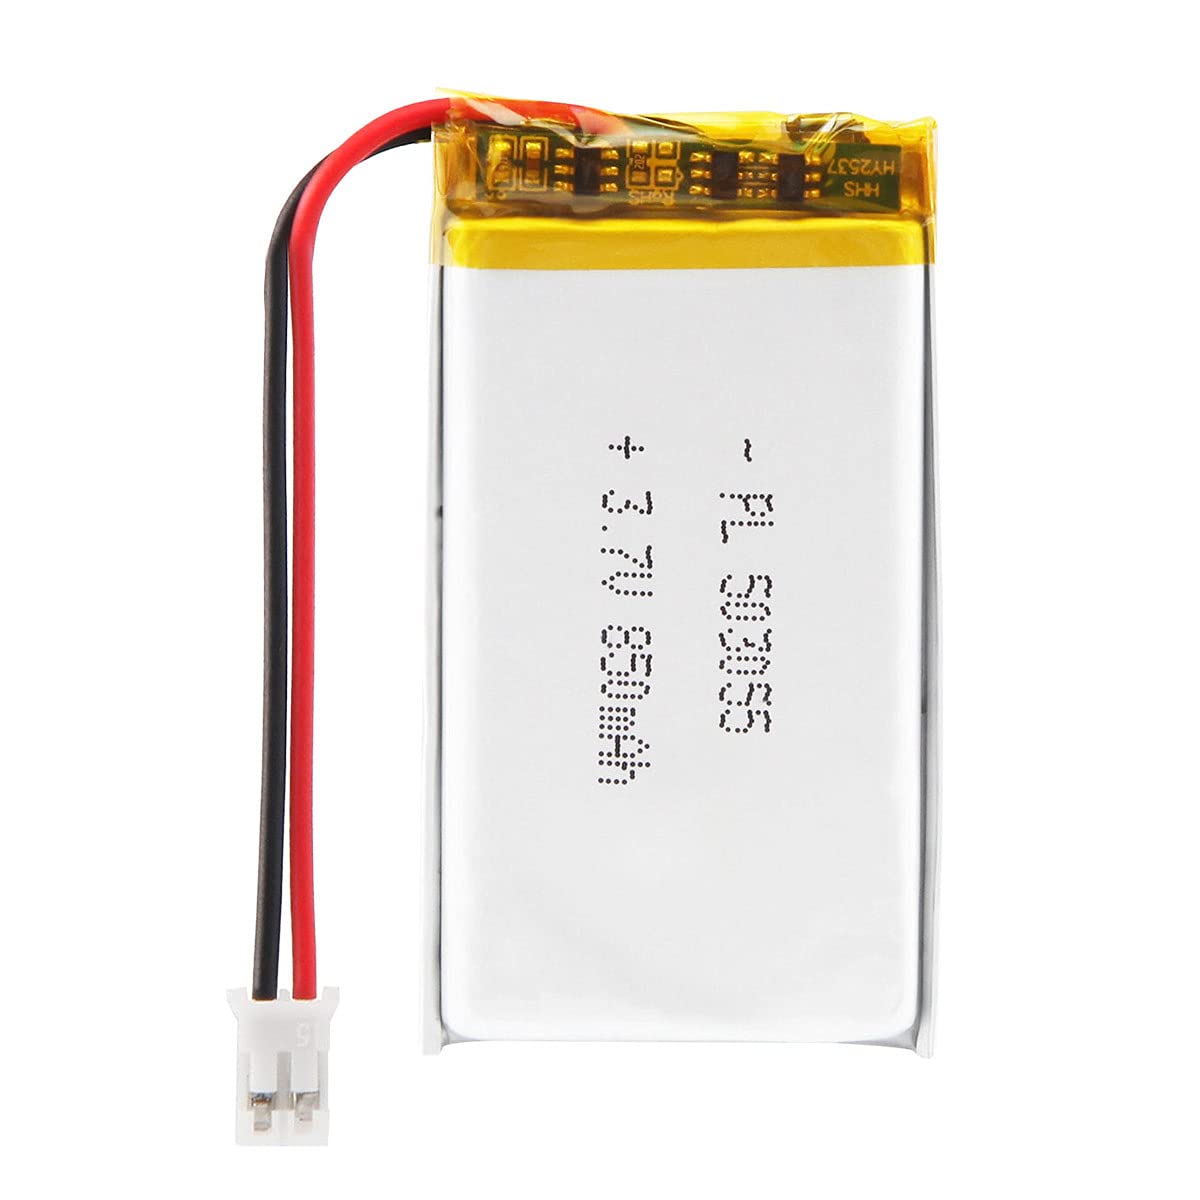 AKZYTUE 3.7V 850mAh 503055 Lipo Battery Rechargeable Lithium Polymer ion Battery with JST Connector